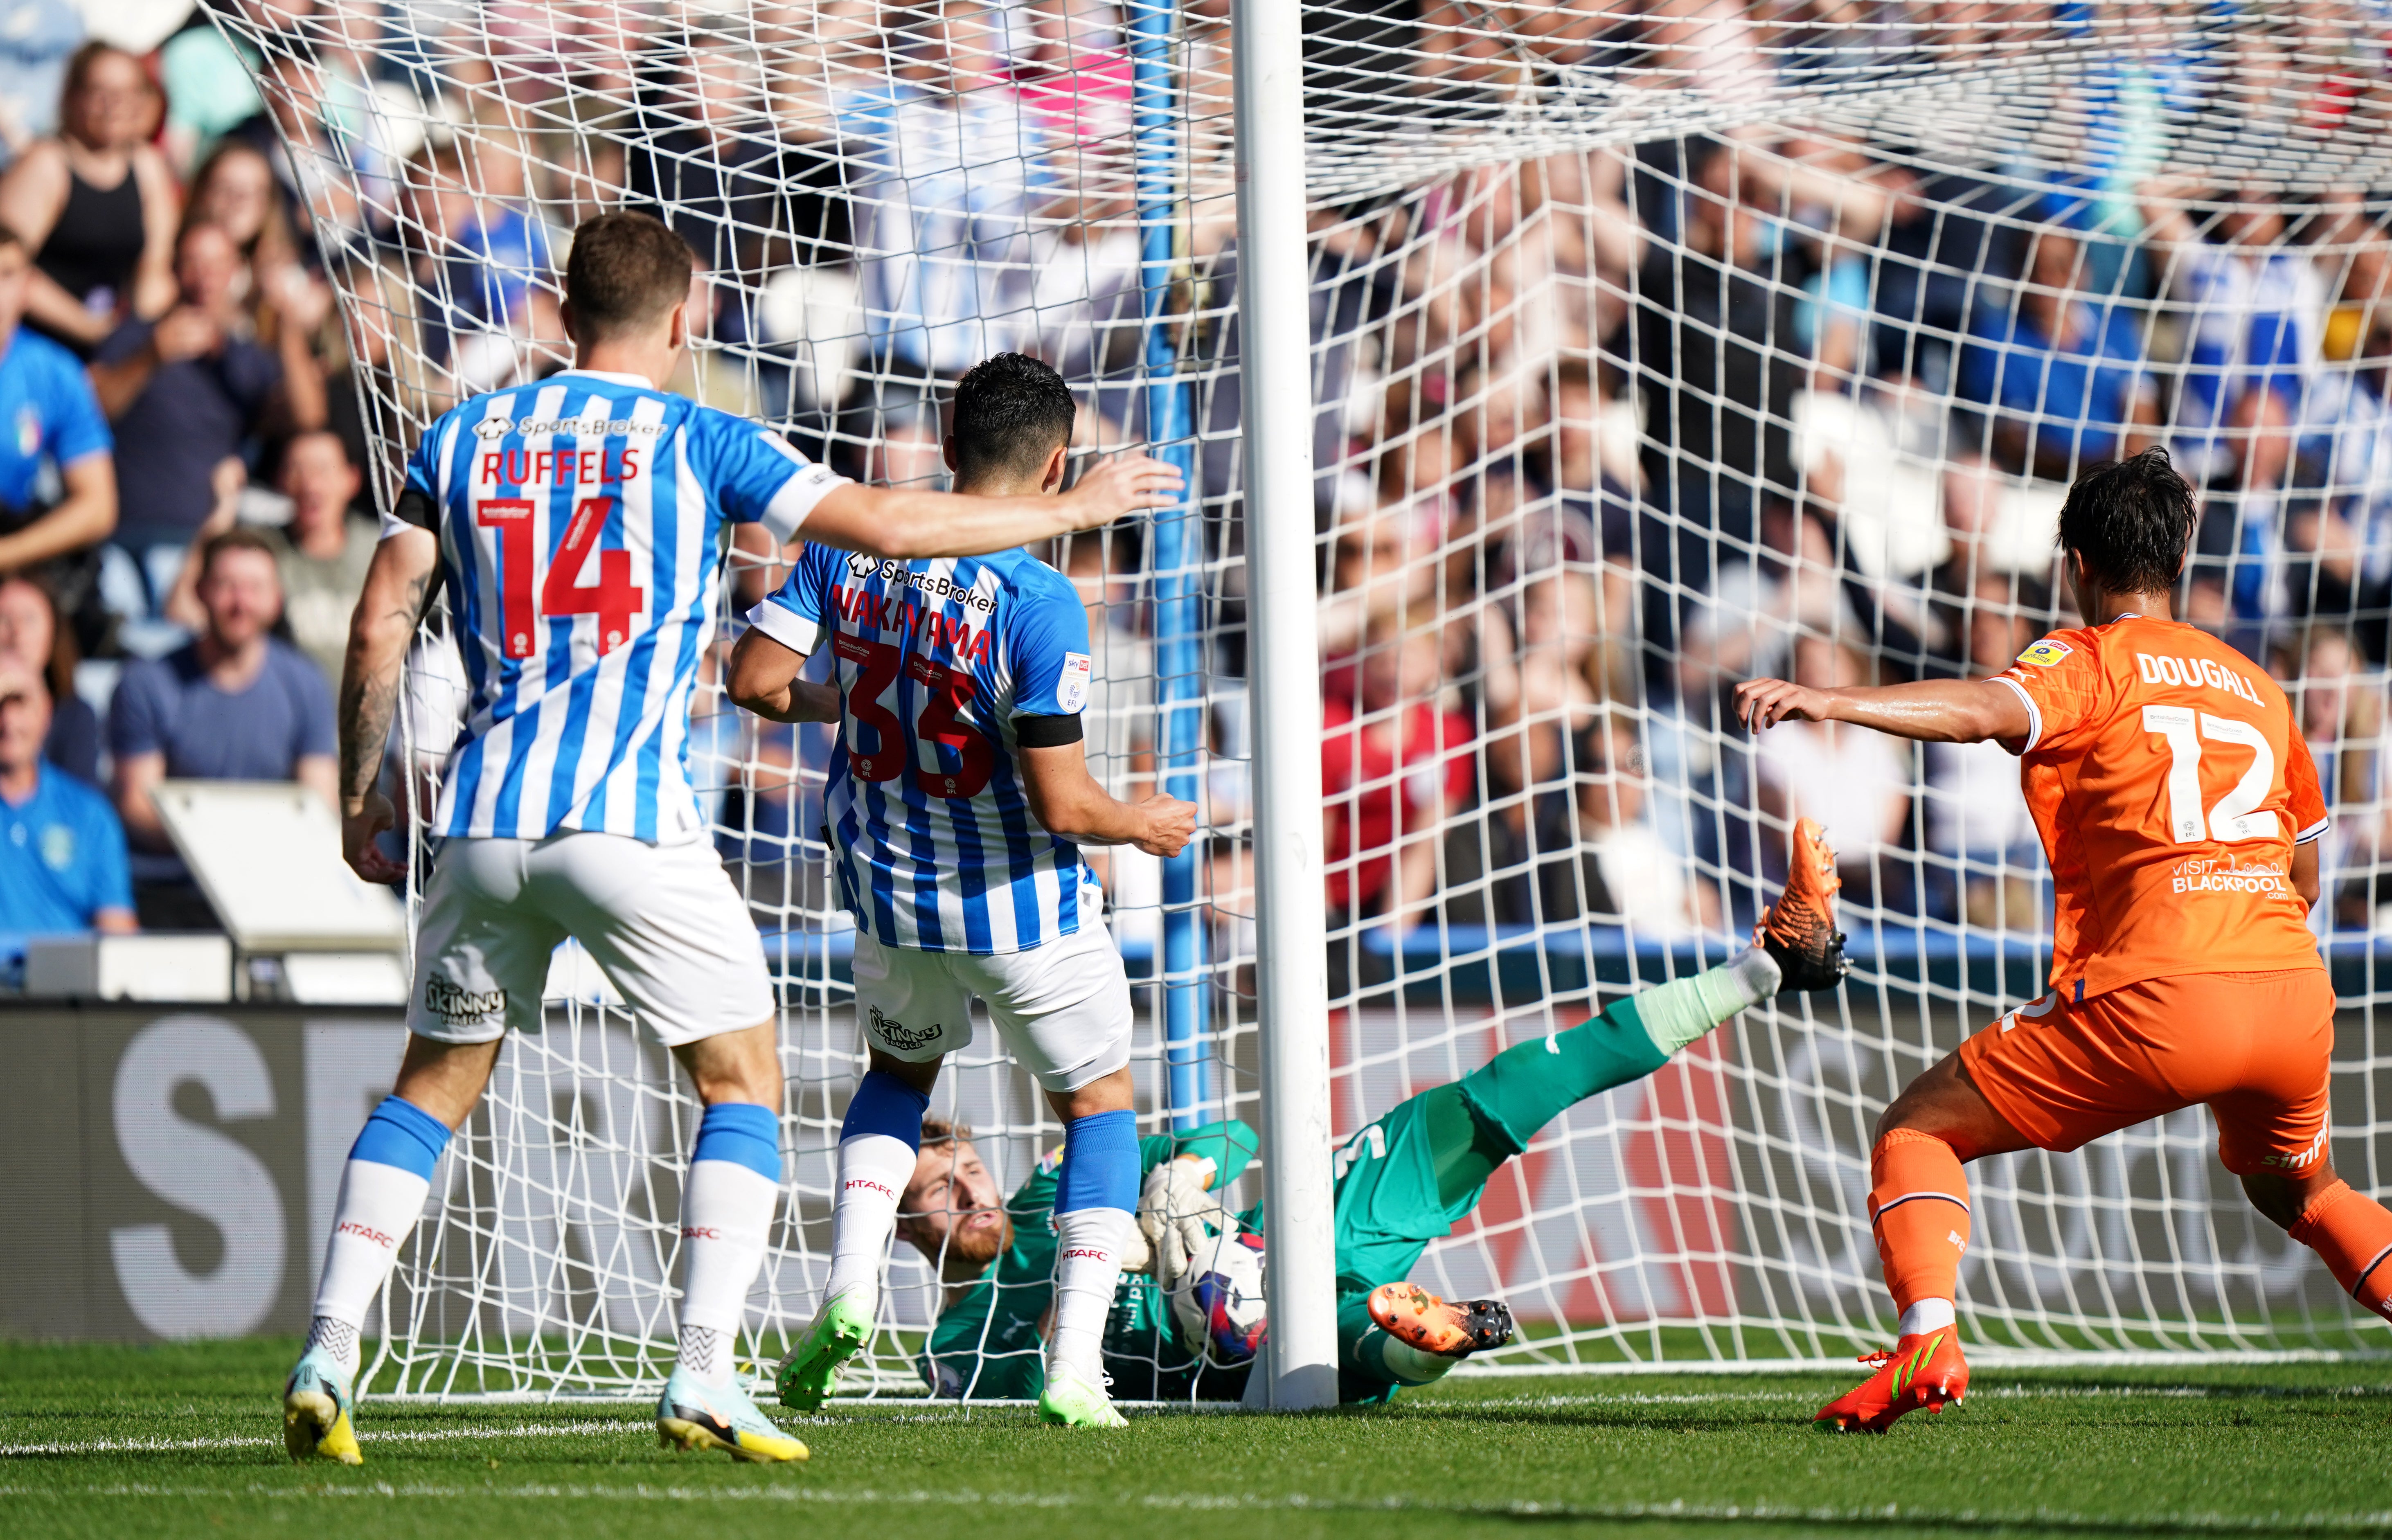 Huddersfield’s Yuta Nakayama was denied an equaliser when goal-line technology failed to detect his effort against Blackpool had crossed the line (PA)